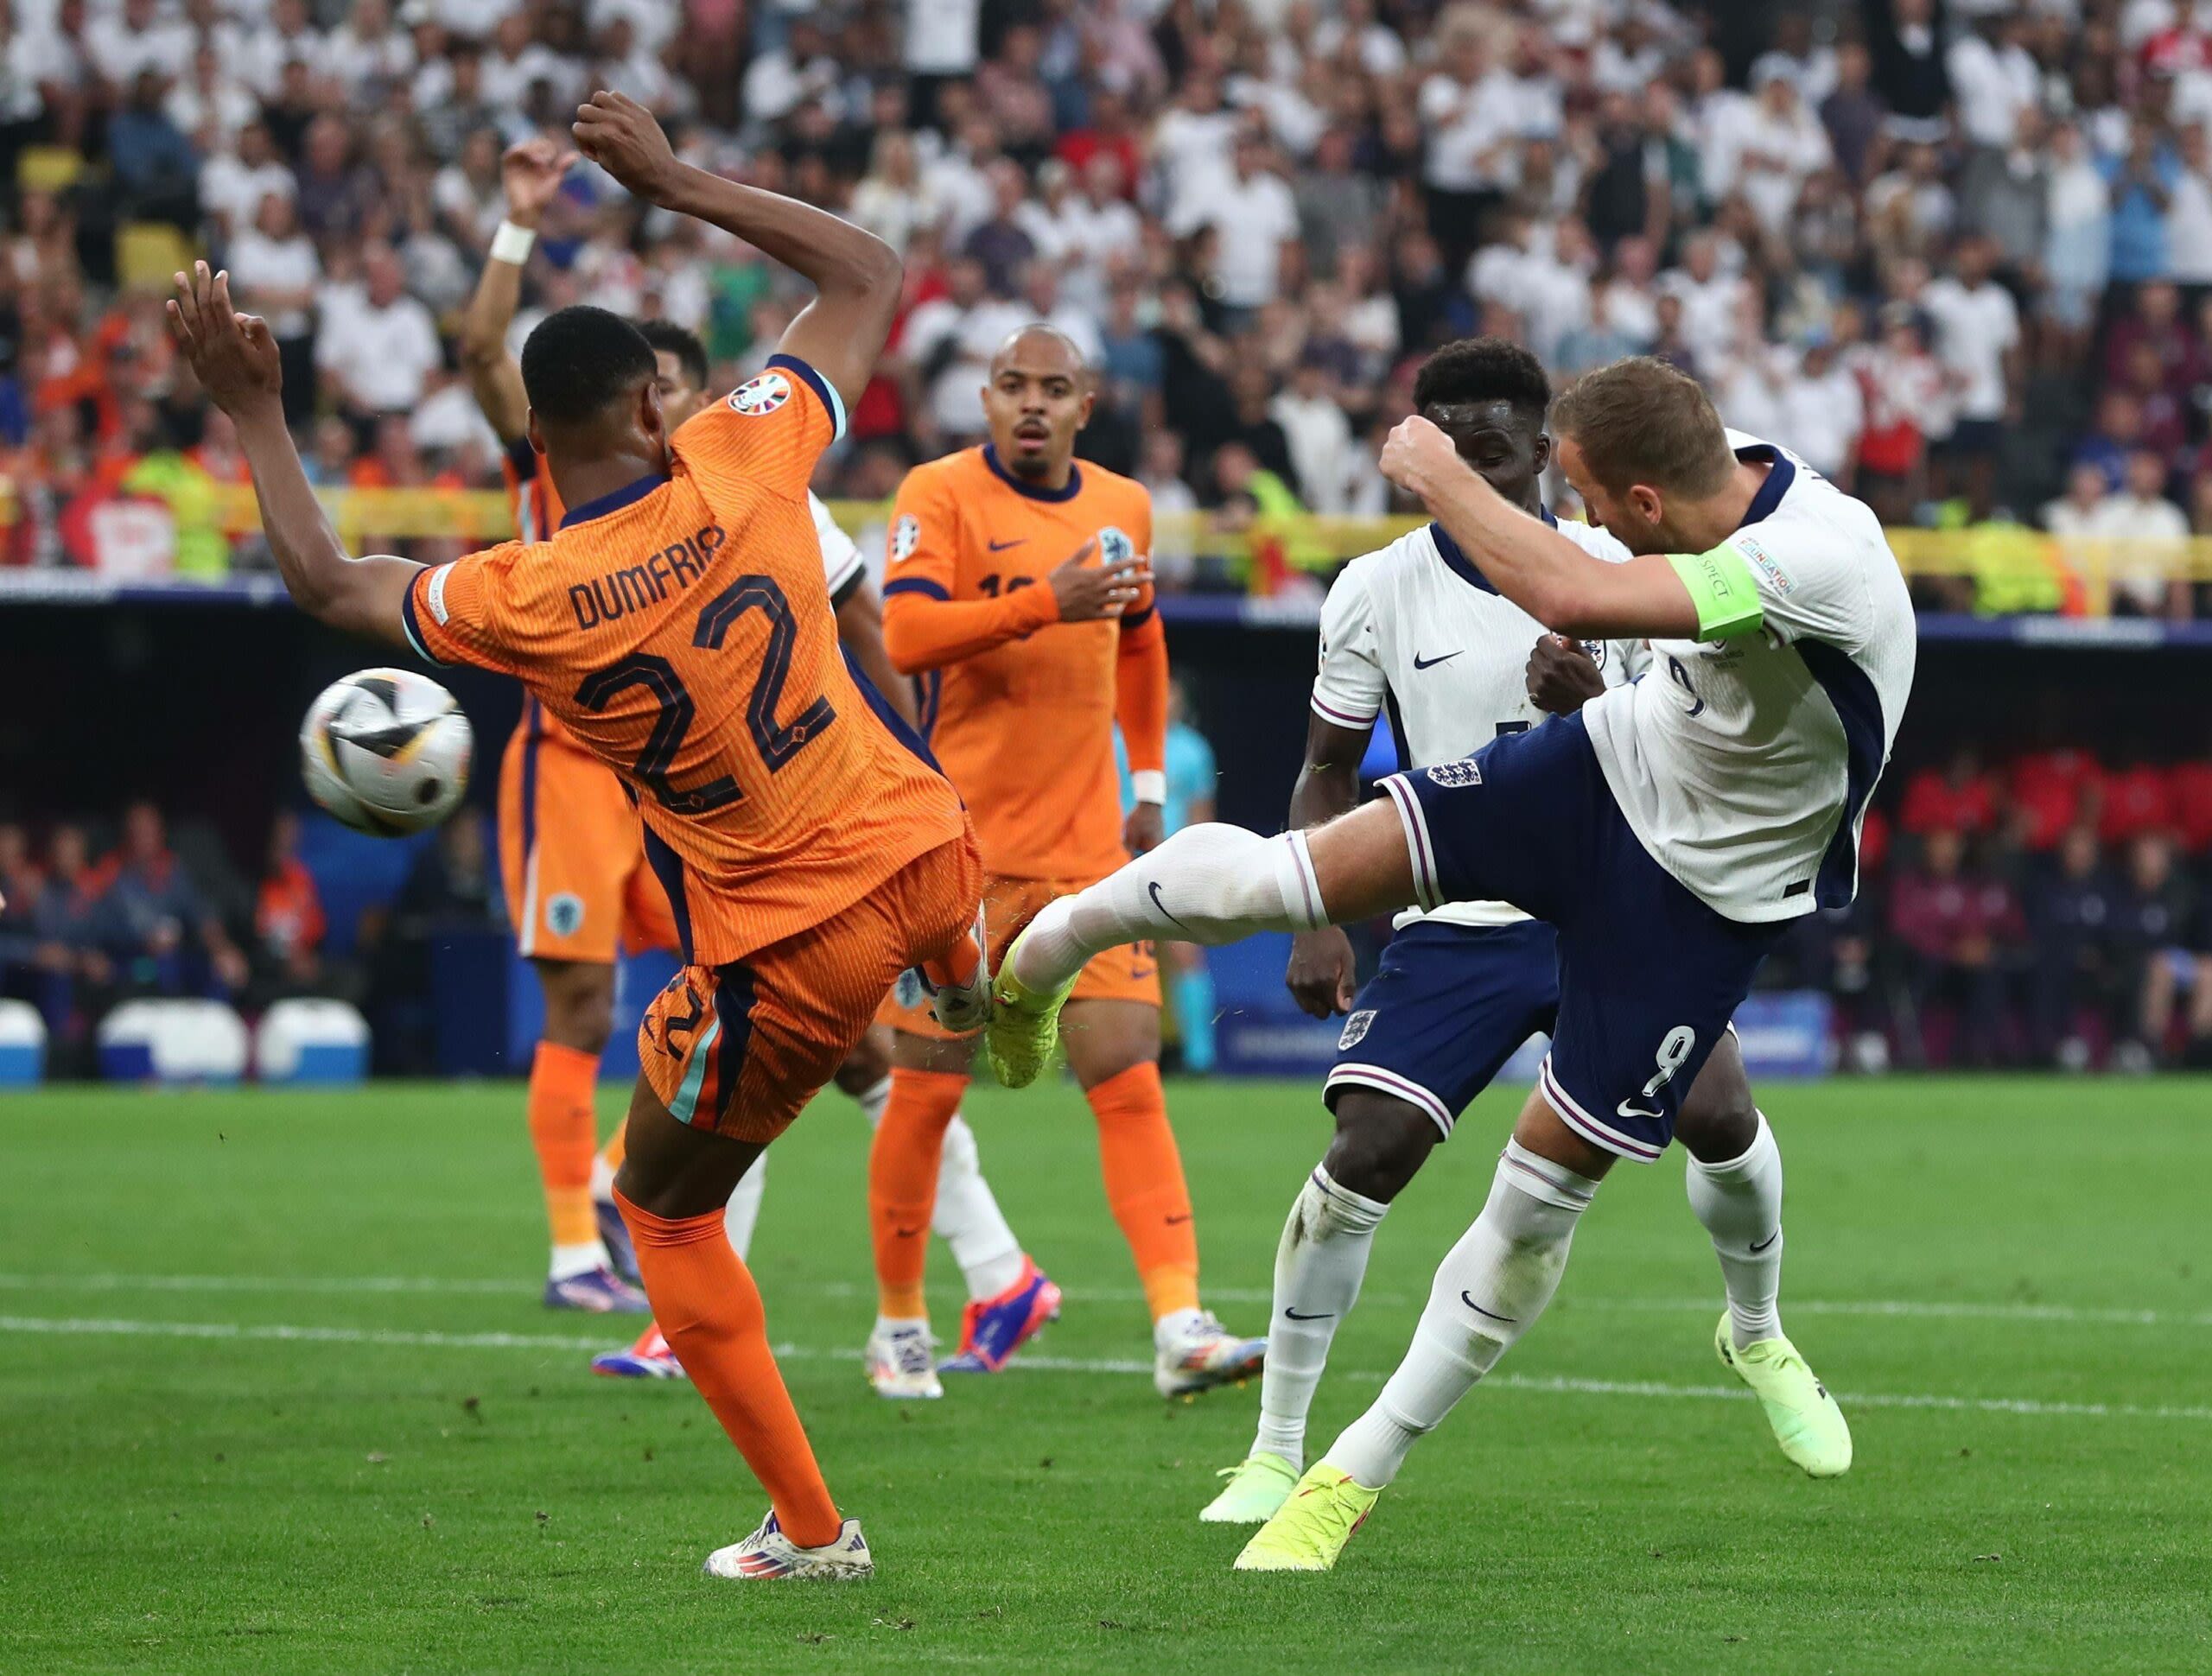 Alan Smith: Could Watkins Really Dethrone Kane in the Final?